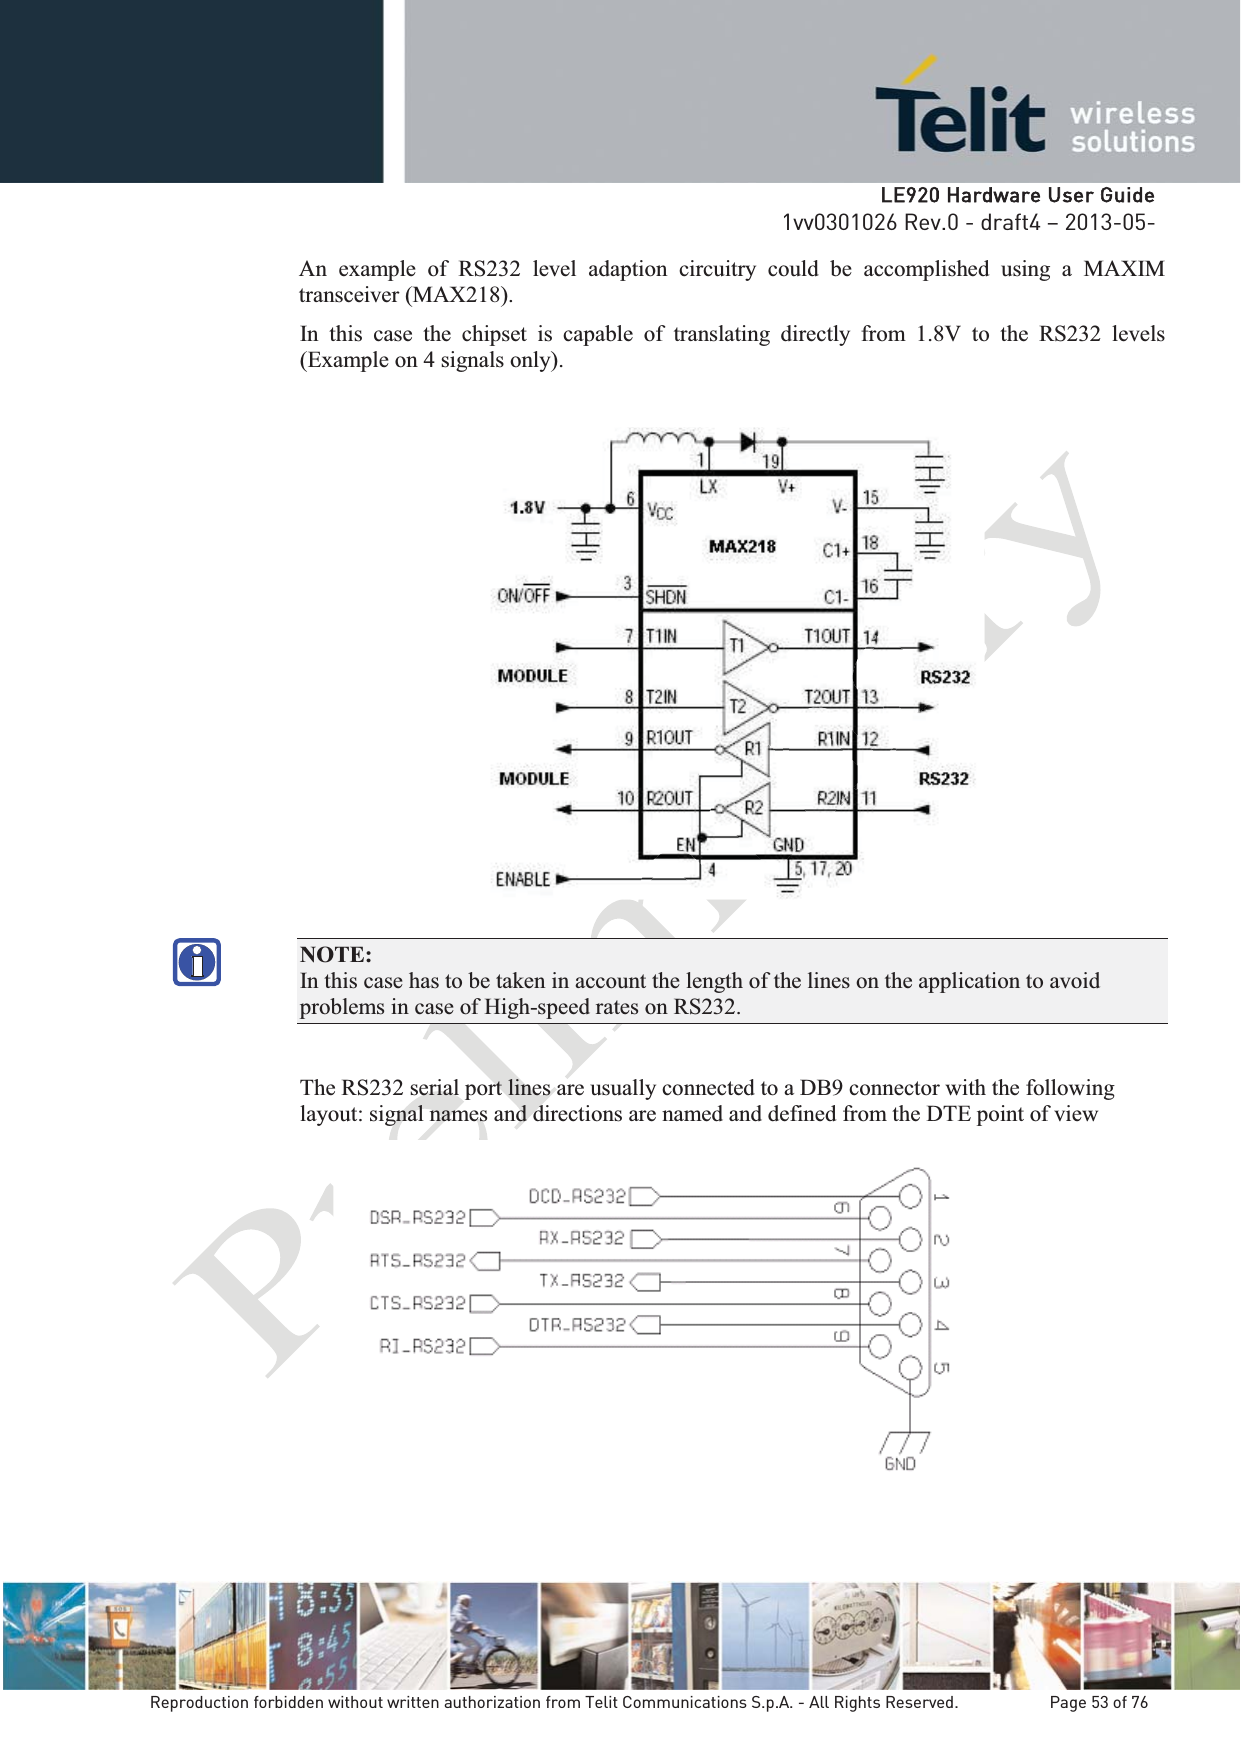   LLE920 Hardware User Guide1vv0301026 Rev.0 - draft4 – 2013-05-Reproduction forbidden without written authorization from Telit Communications S.p.A. - All Rights Reserved.    Page 53 of 76 An example of RS232 level adaption circuitry could be accomplished using a MAXIM transceiver (MAX218).  In this case the chipset is capable of translating directly from 1.8V to the RS232 levels (Example on 4 signals only).    NOTE:  In this case has to be taken in account the length of the lines on the application to avoid problems in case of High-speed rates on RS232. The RS232 serial port lines are usually connected to a DB9 connector with the following layout: signal names and directions are named and defined from the DTE point of view  